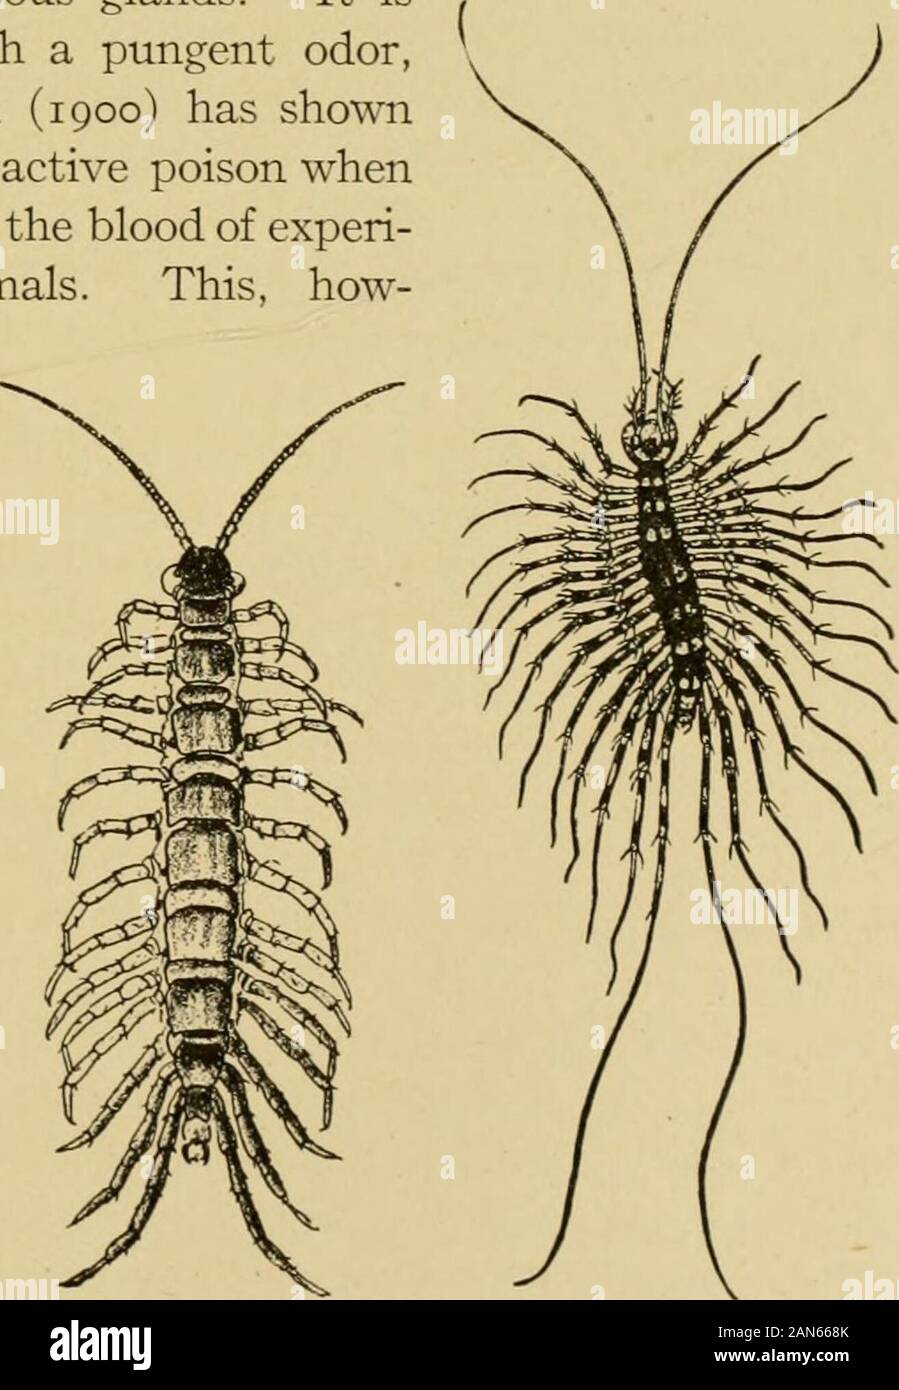 Handbook of medical entomology . n moist places, feeding primarily on  decay-ing vegetable matter, though a few species occasion-ally attack  growing plants. The millipedes are inoffensive and harmless.  Julusterrestris, and related species,